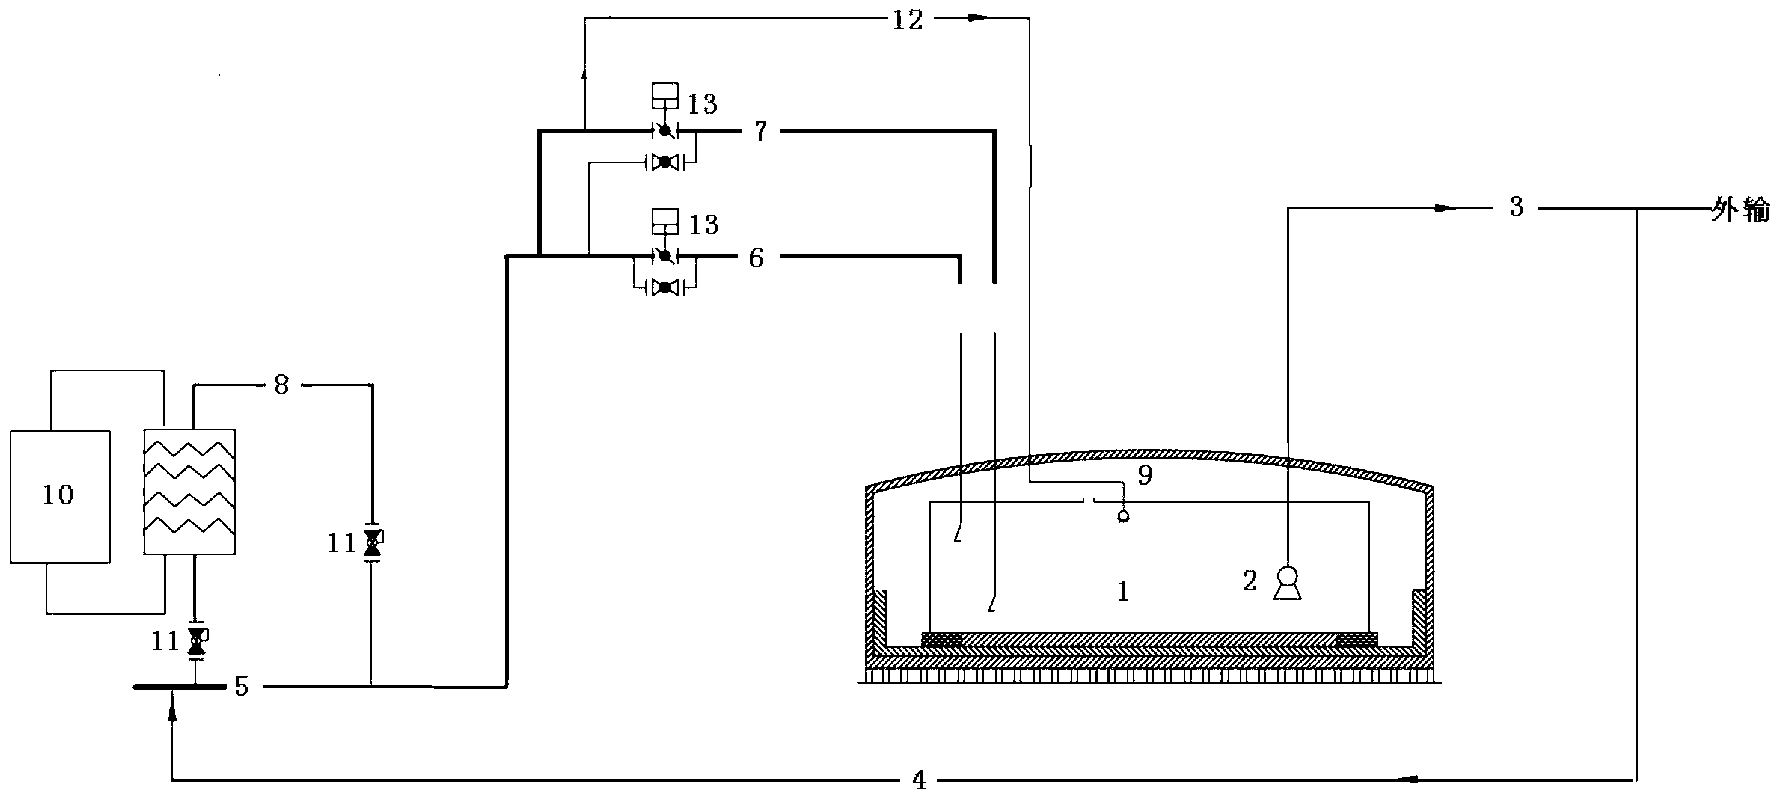 Low-energy-consumption zero-emission evaporated gas treating system of liquefied natural gas (LNG) receiving station